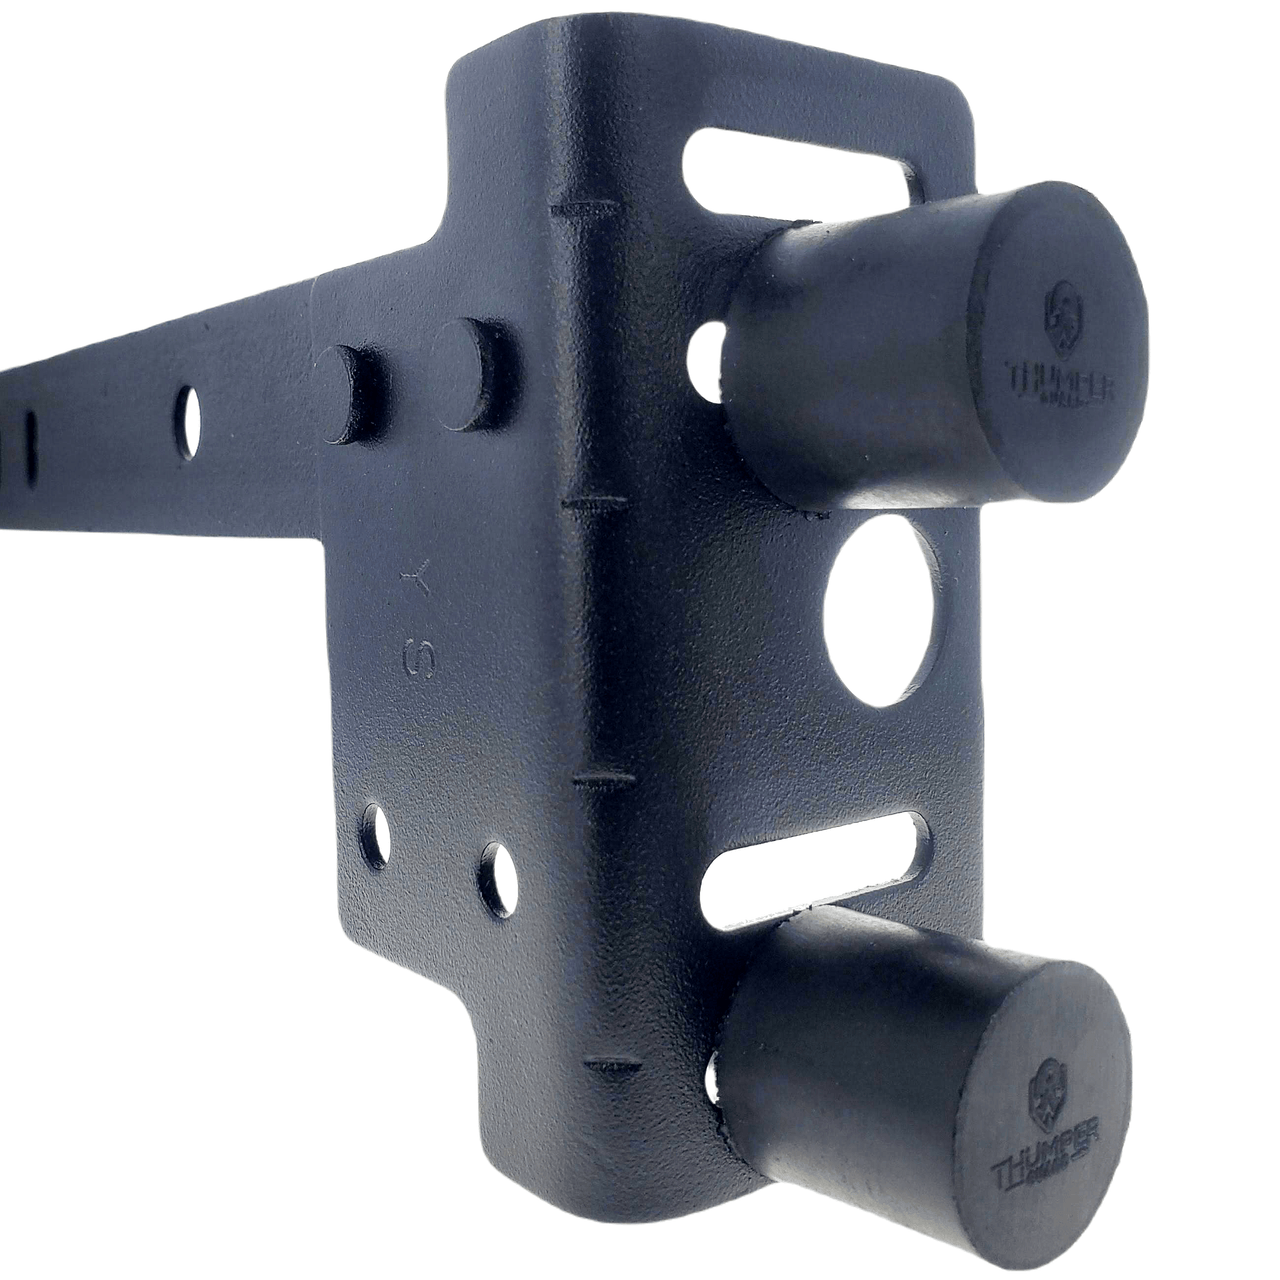 bedCLAW THUMPER GUARD™ Heavy-Duty PRO Bed Frame Bracket Bumpers, Protects Walls from Damage